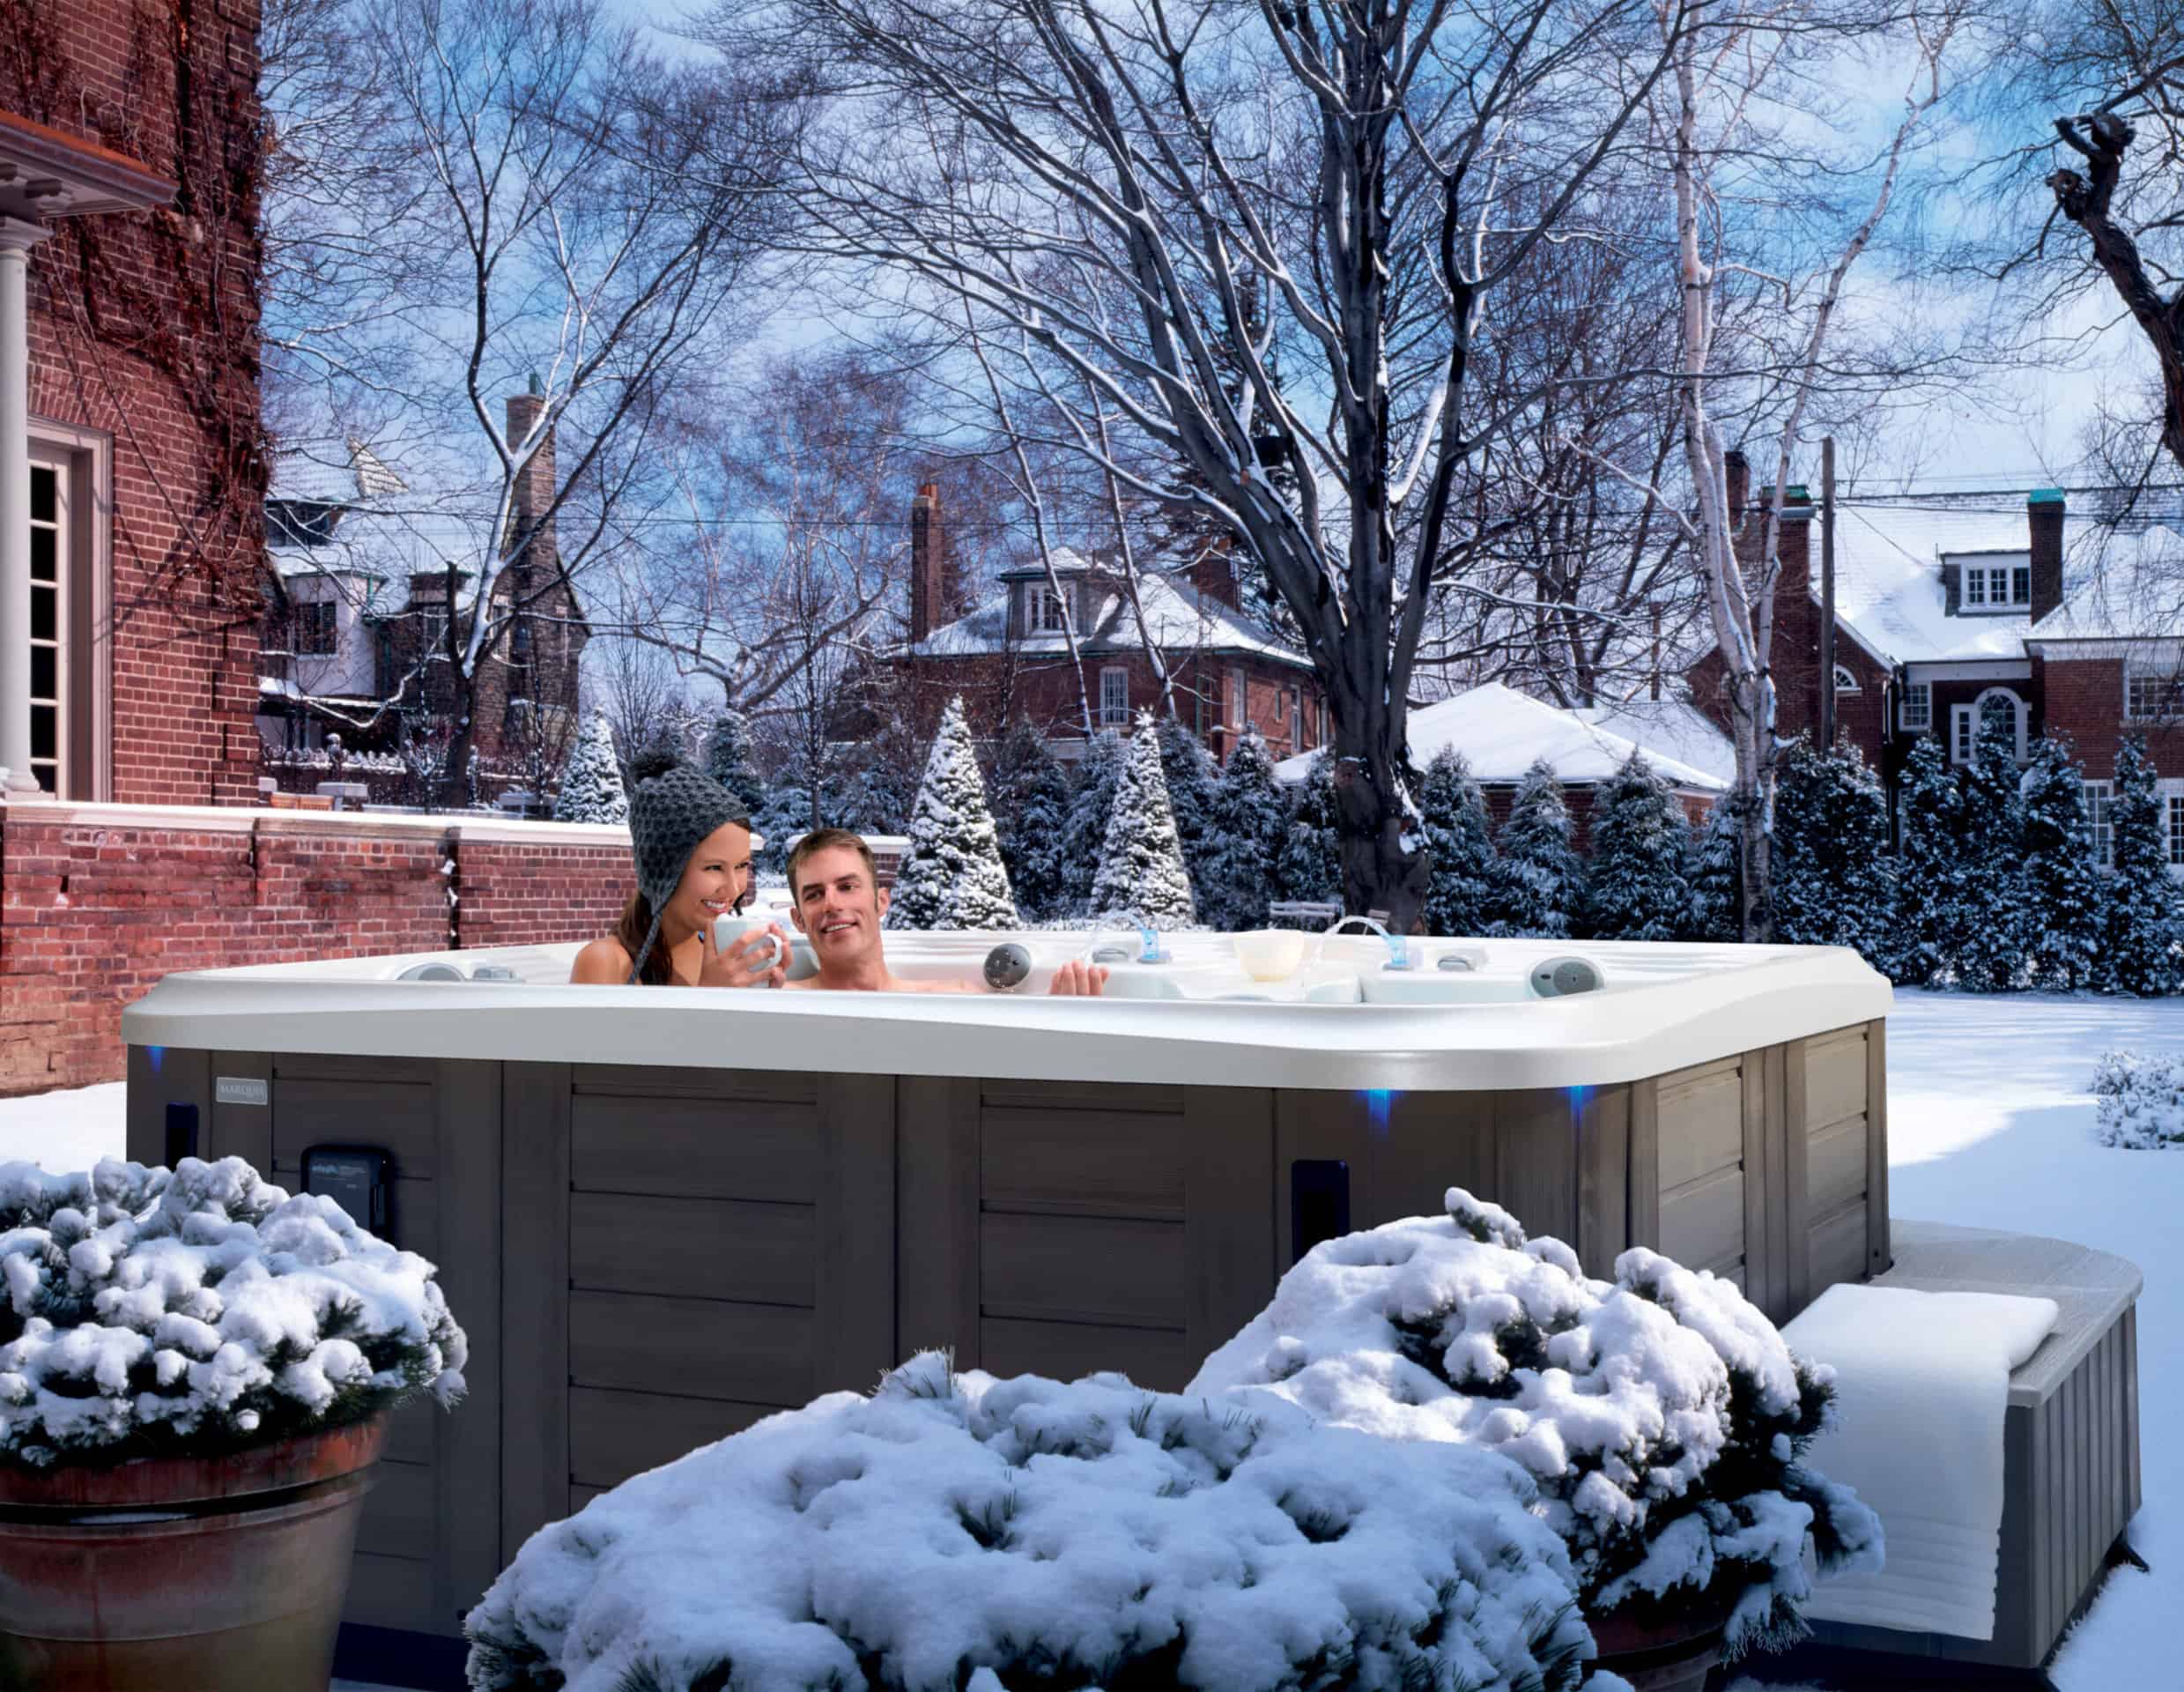 Should I use my hot tub if it's snowing?